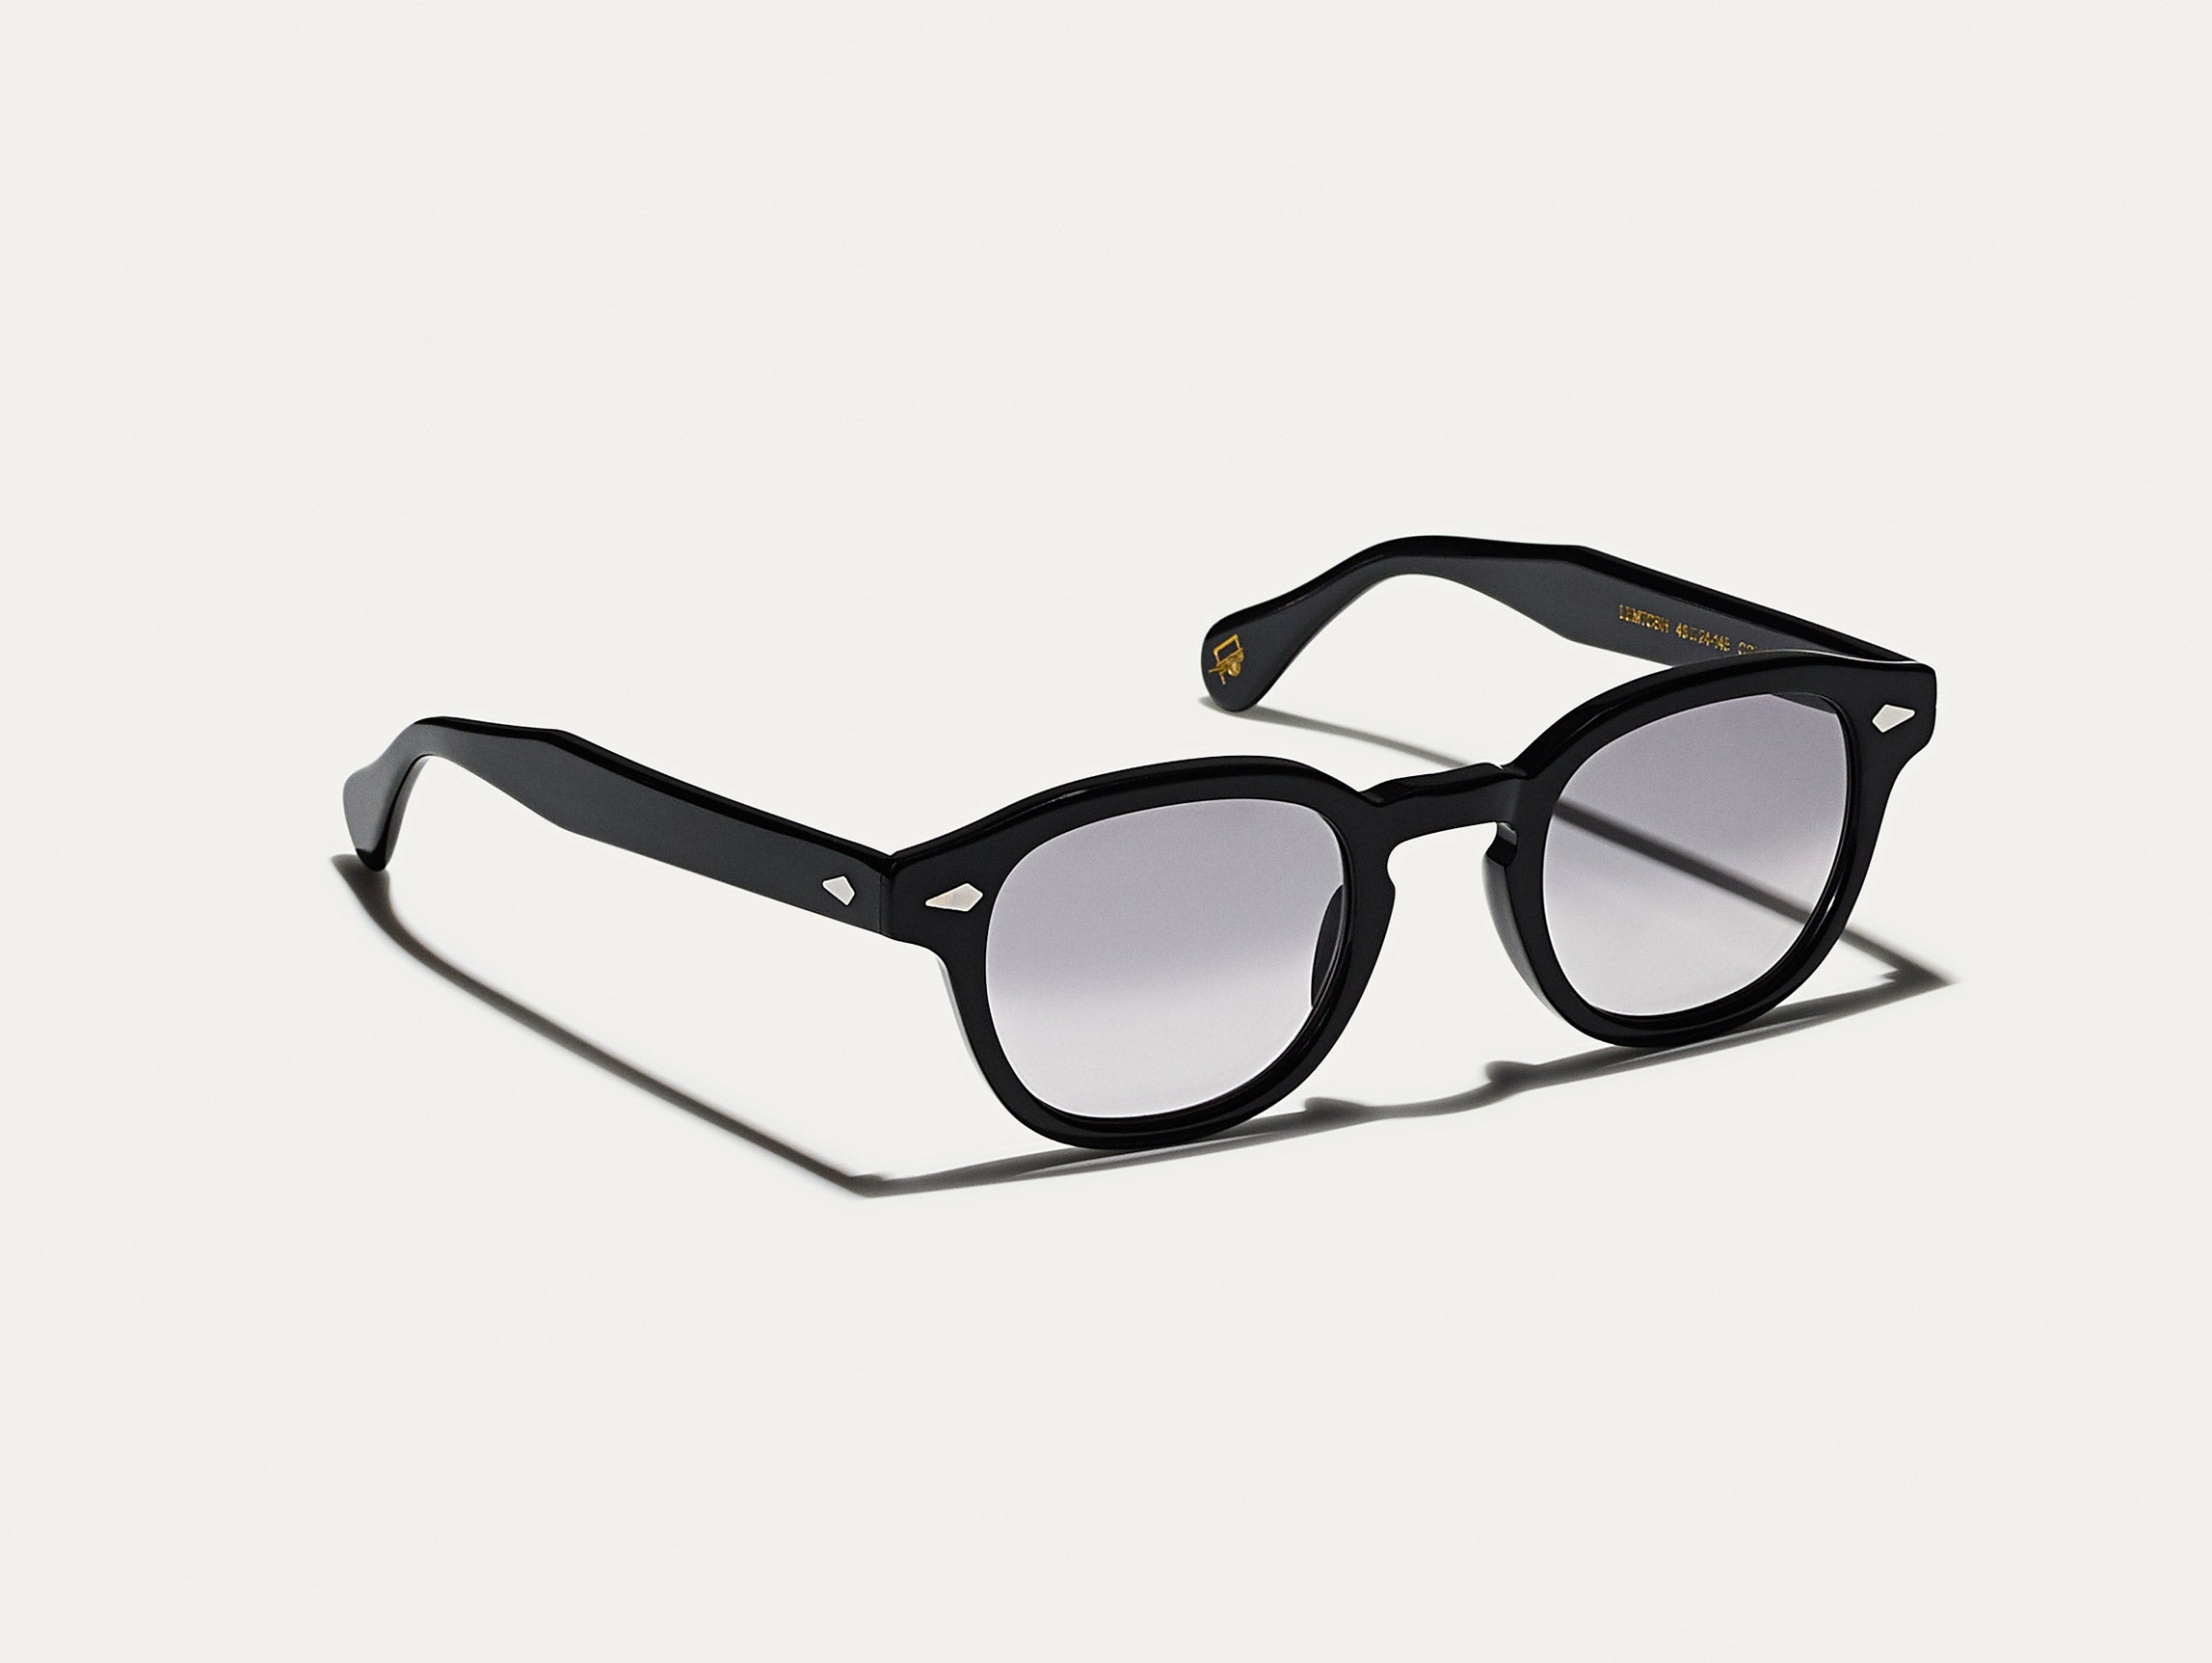 The LEMTOSH Black with American Grey Fade Tinted Lenses